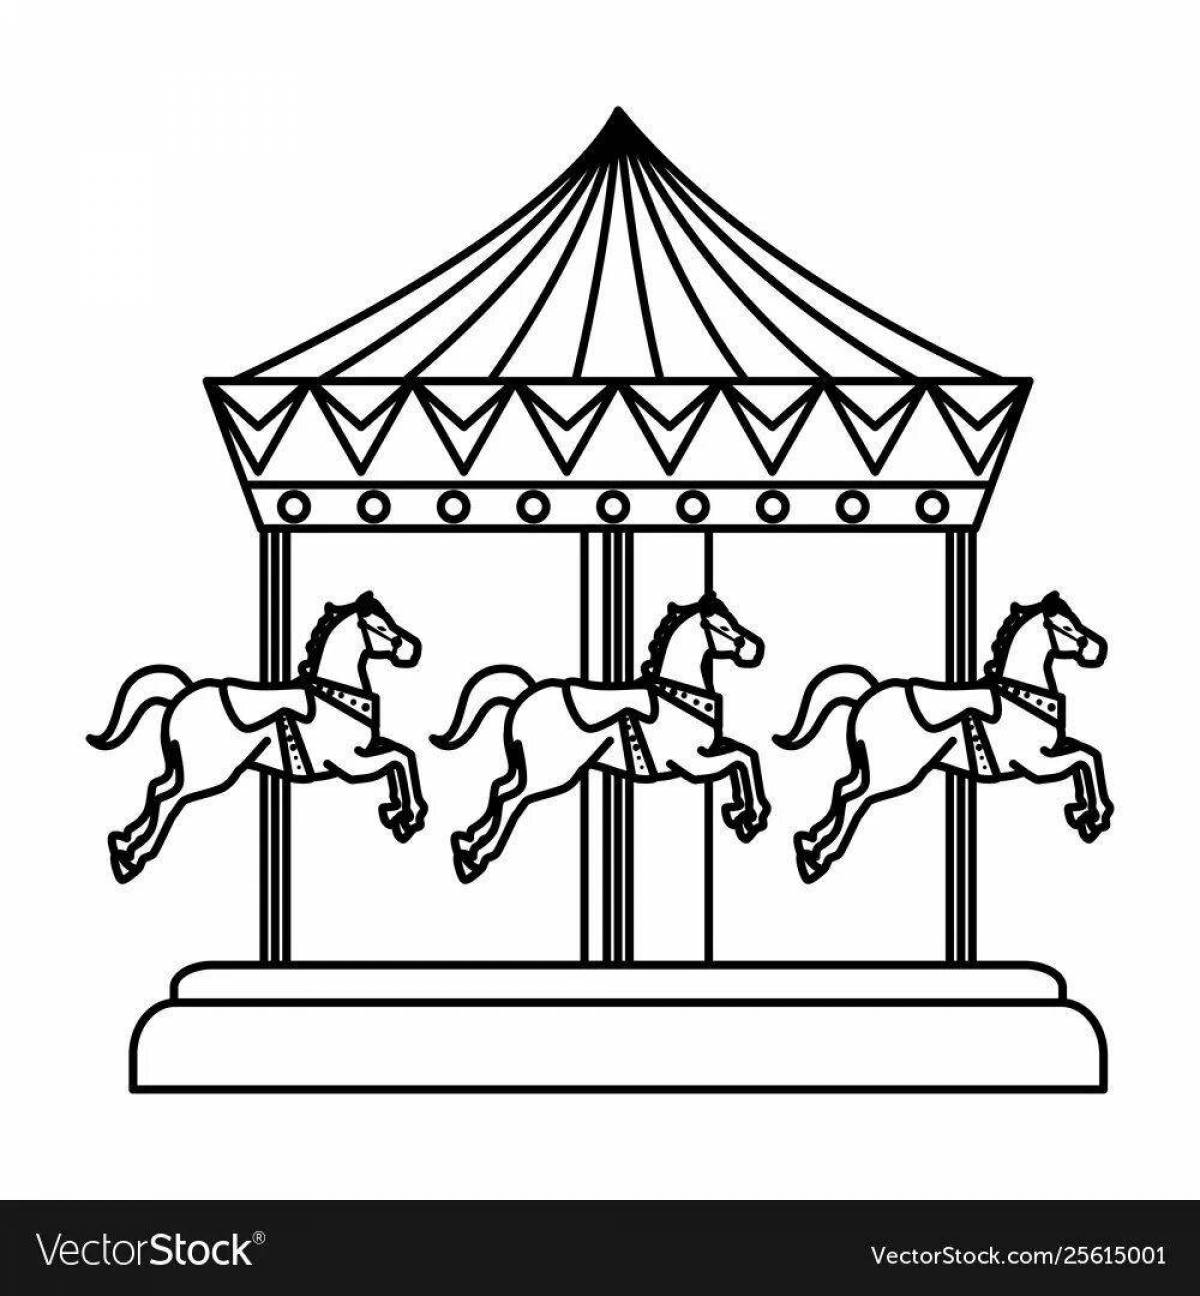 Outstanding carousel coloring for toddlers